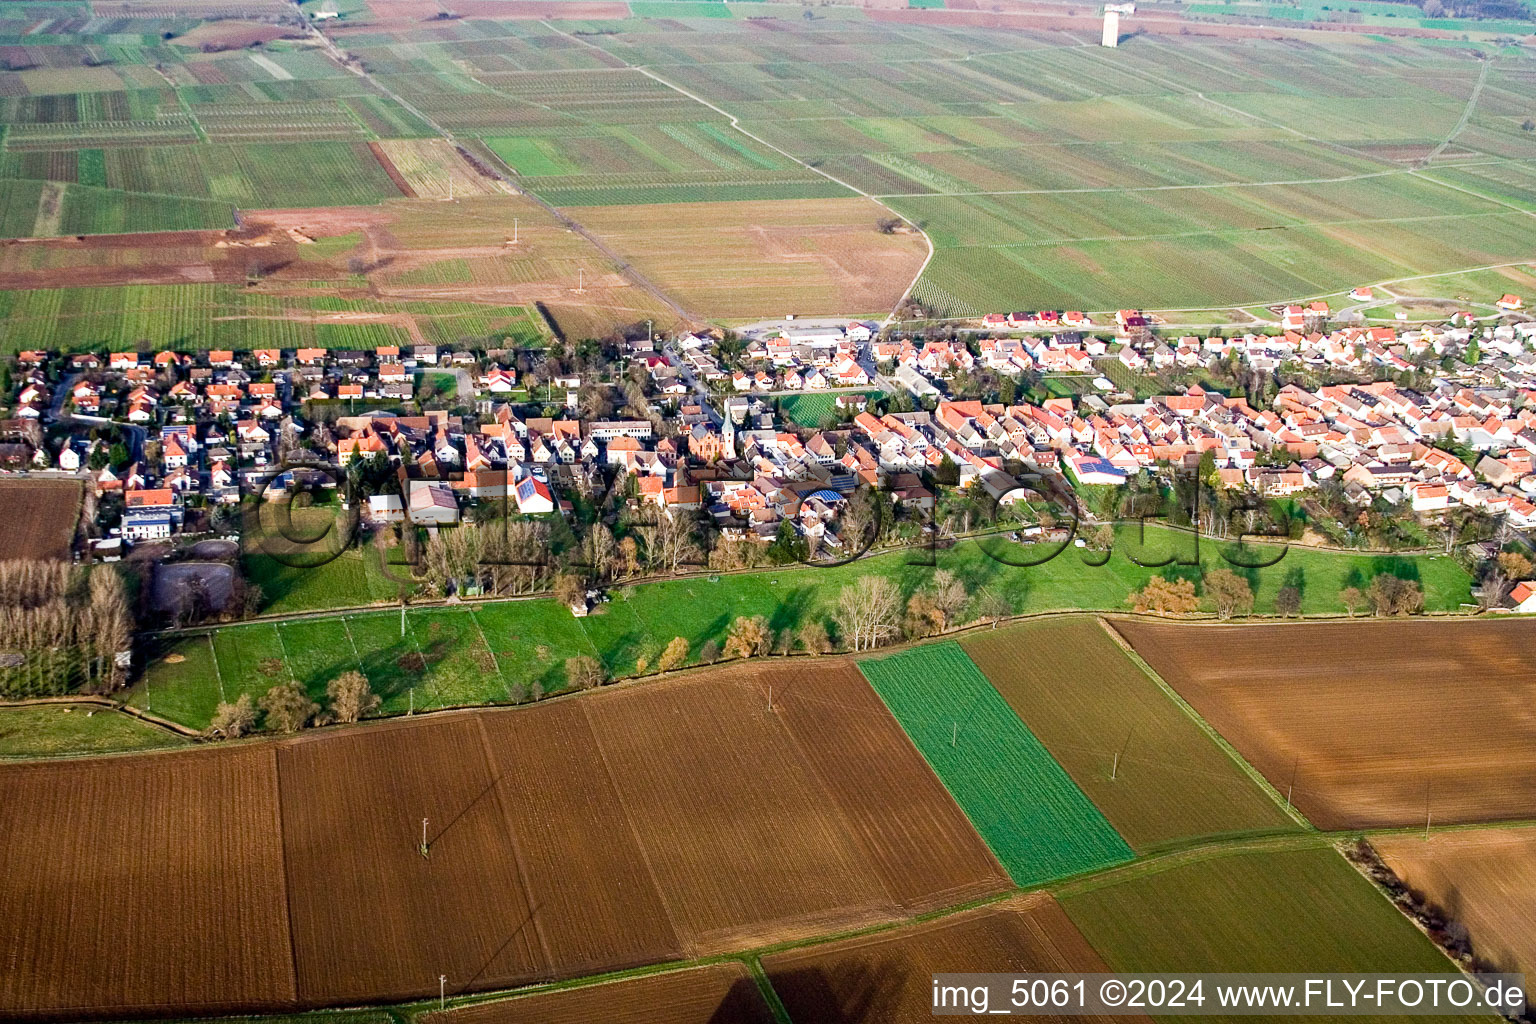 Aerial photograpy of Village - view on the edge of agricultural fields and farmland in the district Duttweiler in Neustadt an der Weinstrasse in the state Rhineland-Palatinate